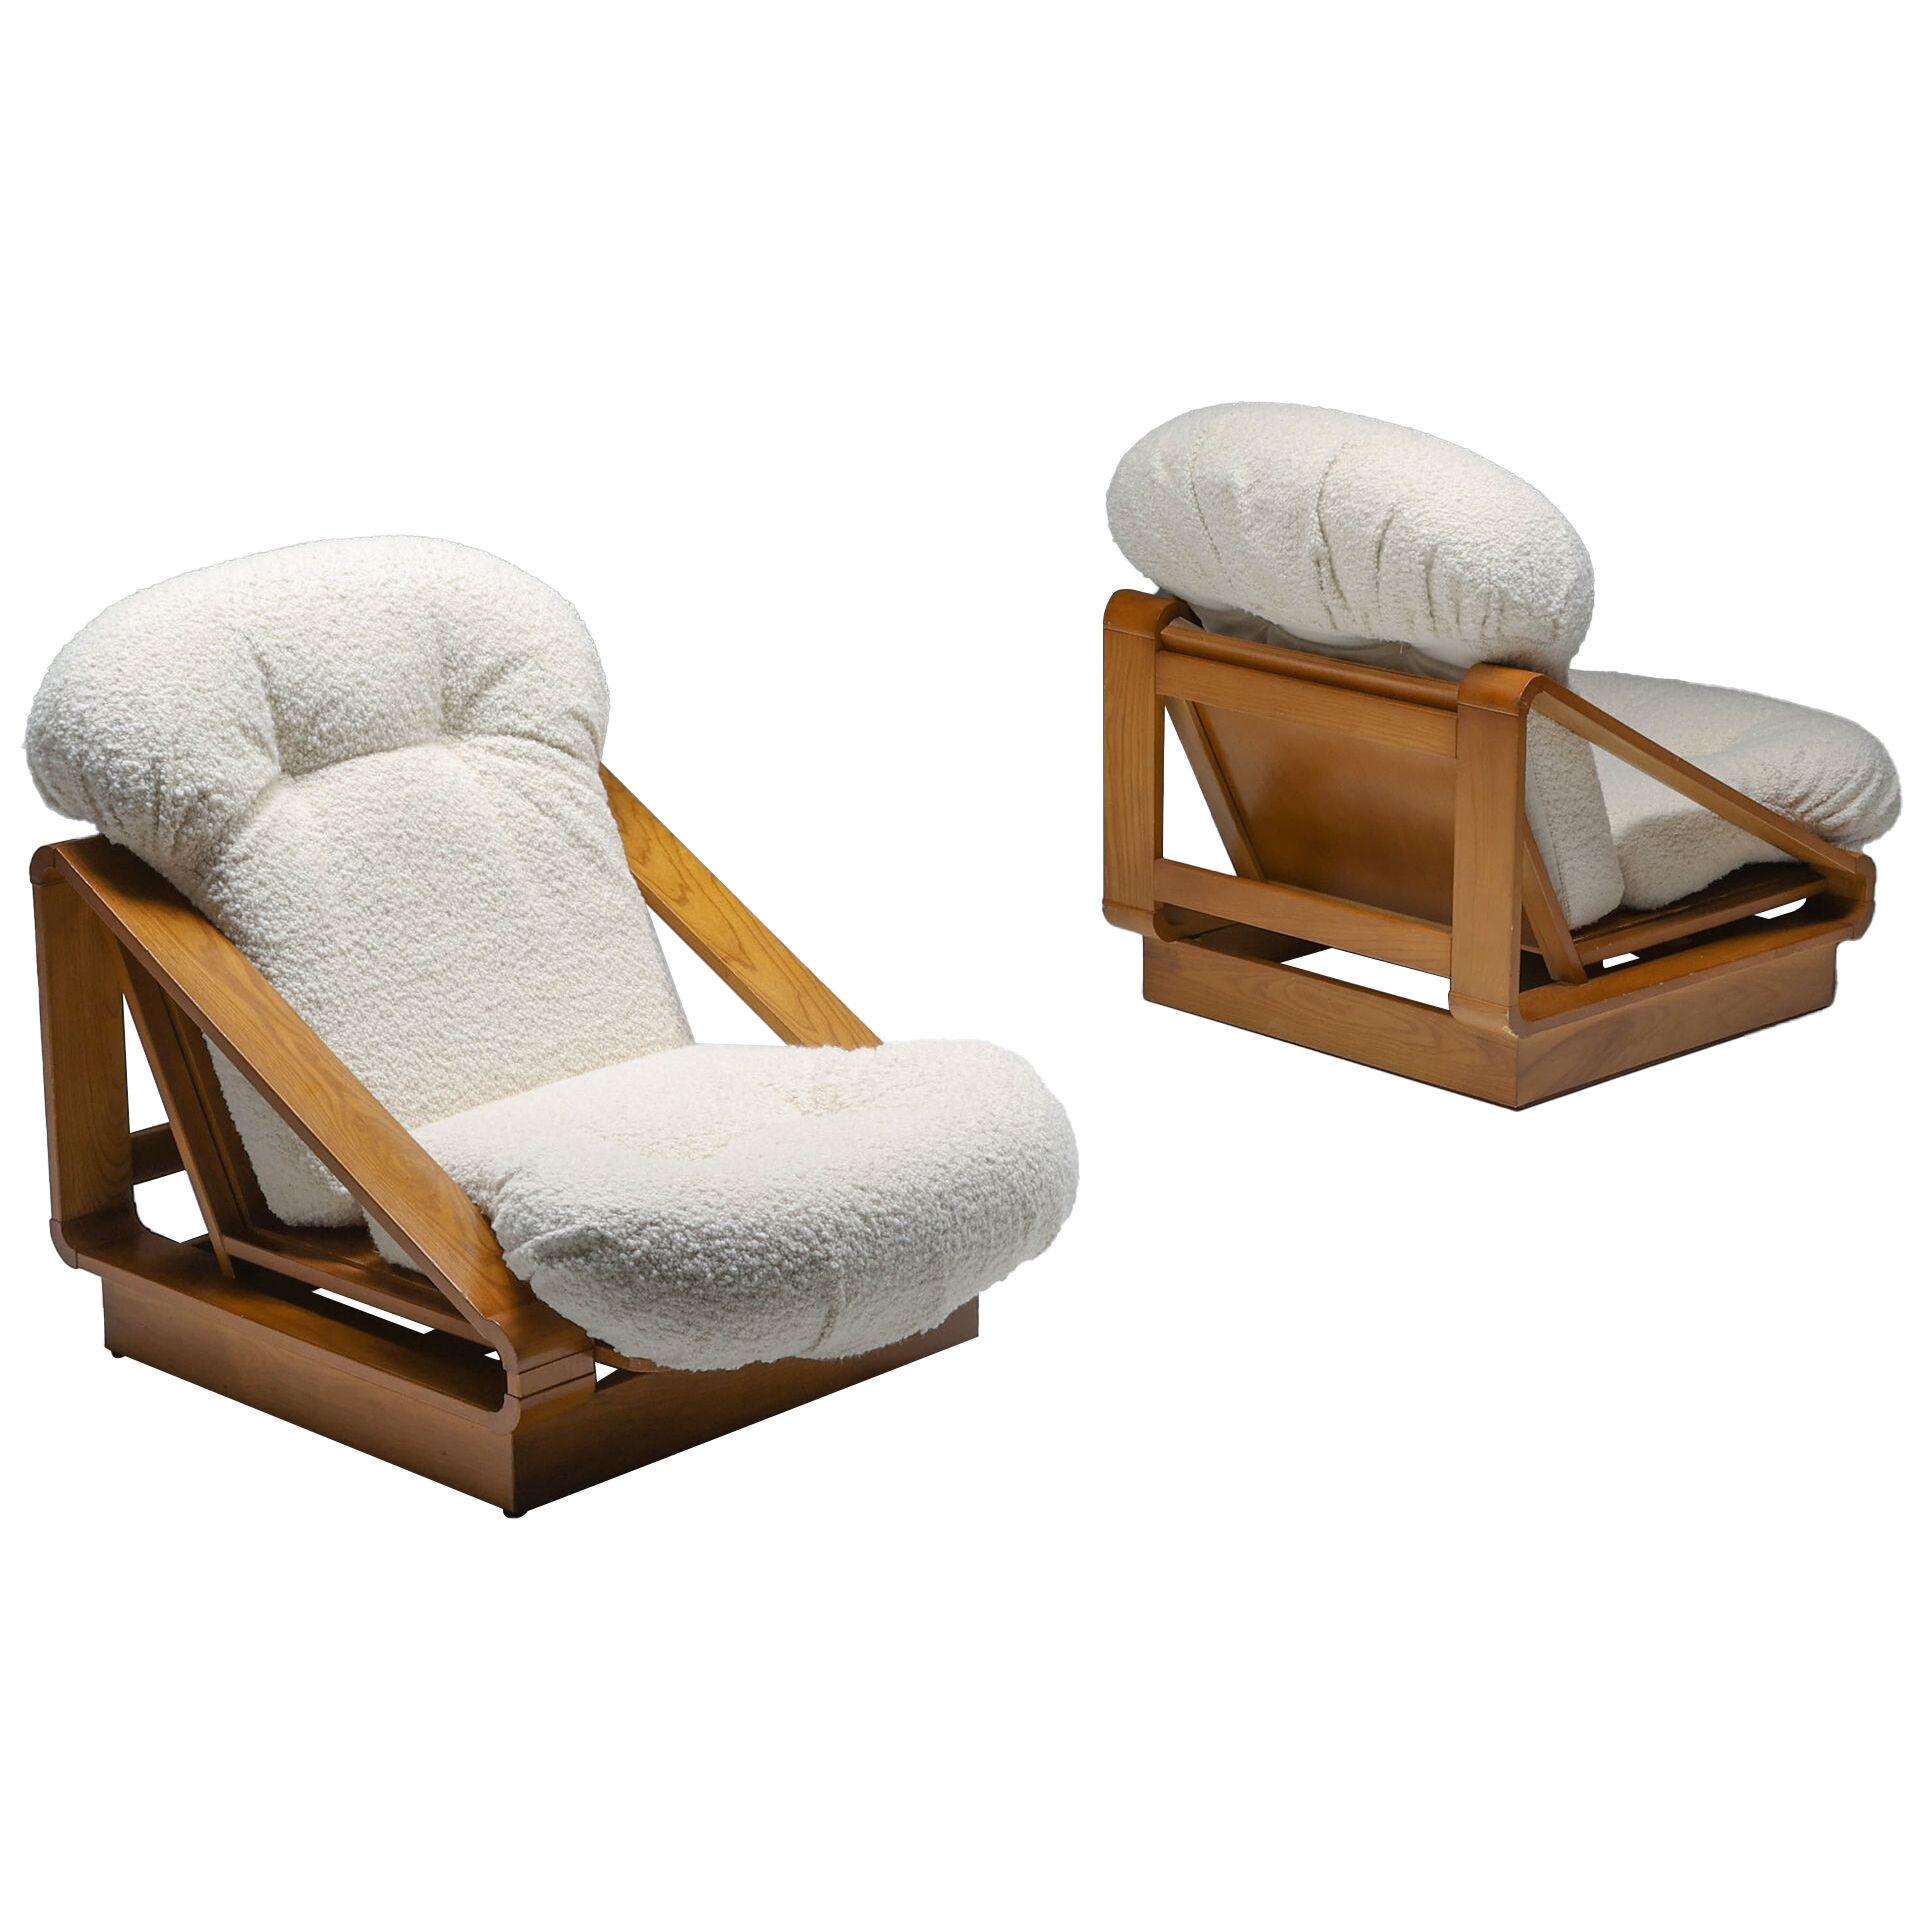 Lounge Chairs by Renato Toso & Roberto Patio for Stilwood - 1960's